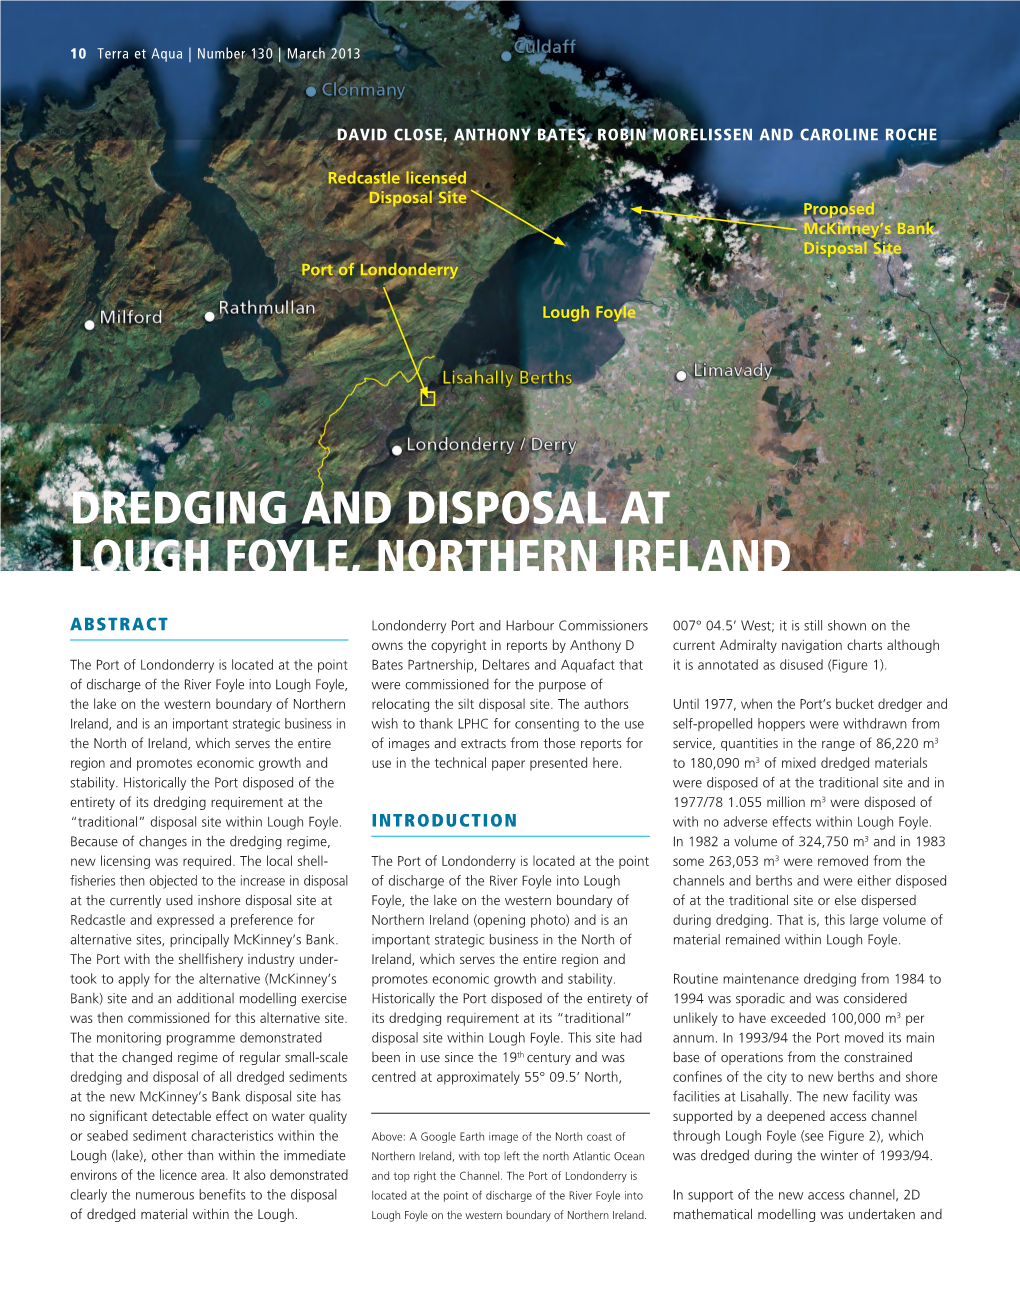 Dredging and Disposal at Lough Foyle, Northern Ireland